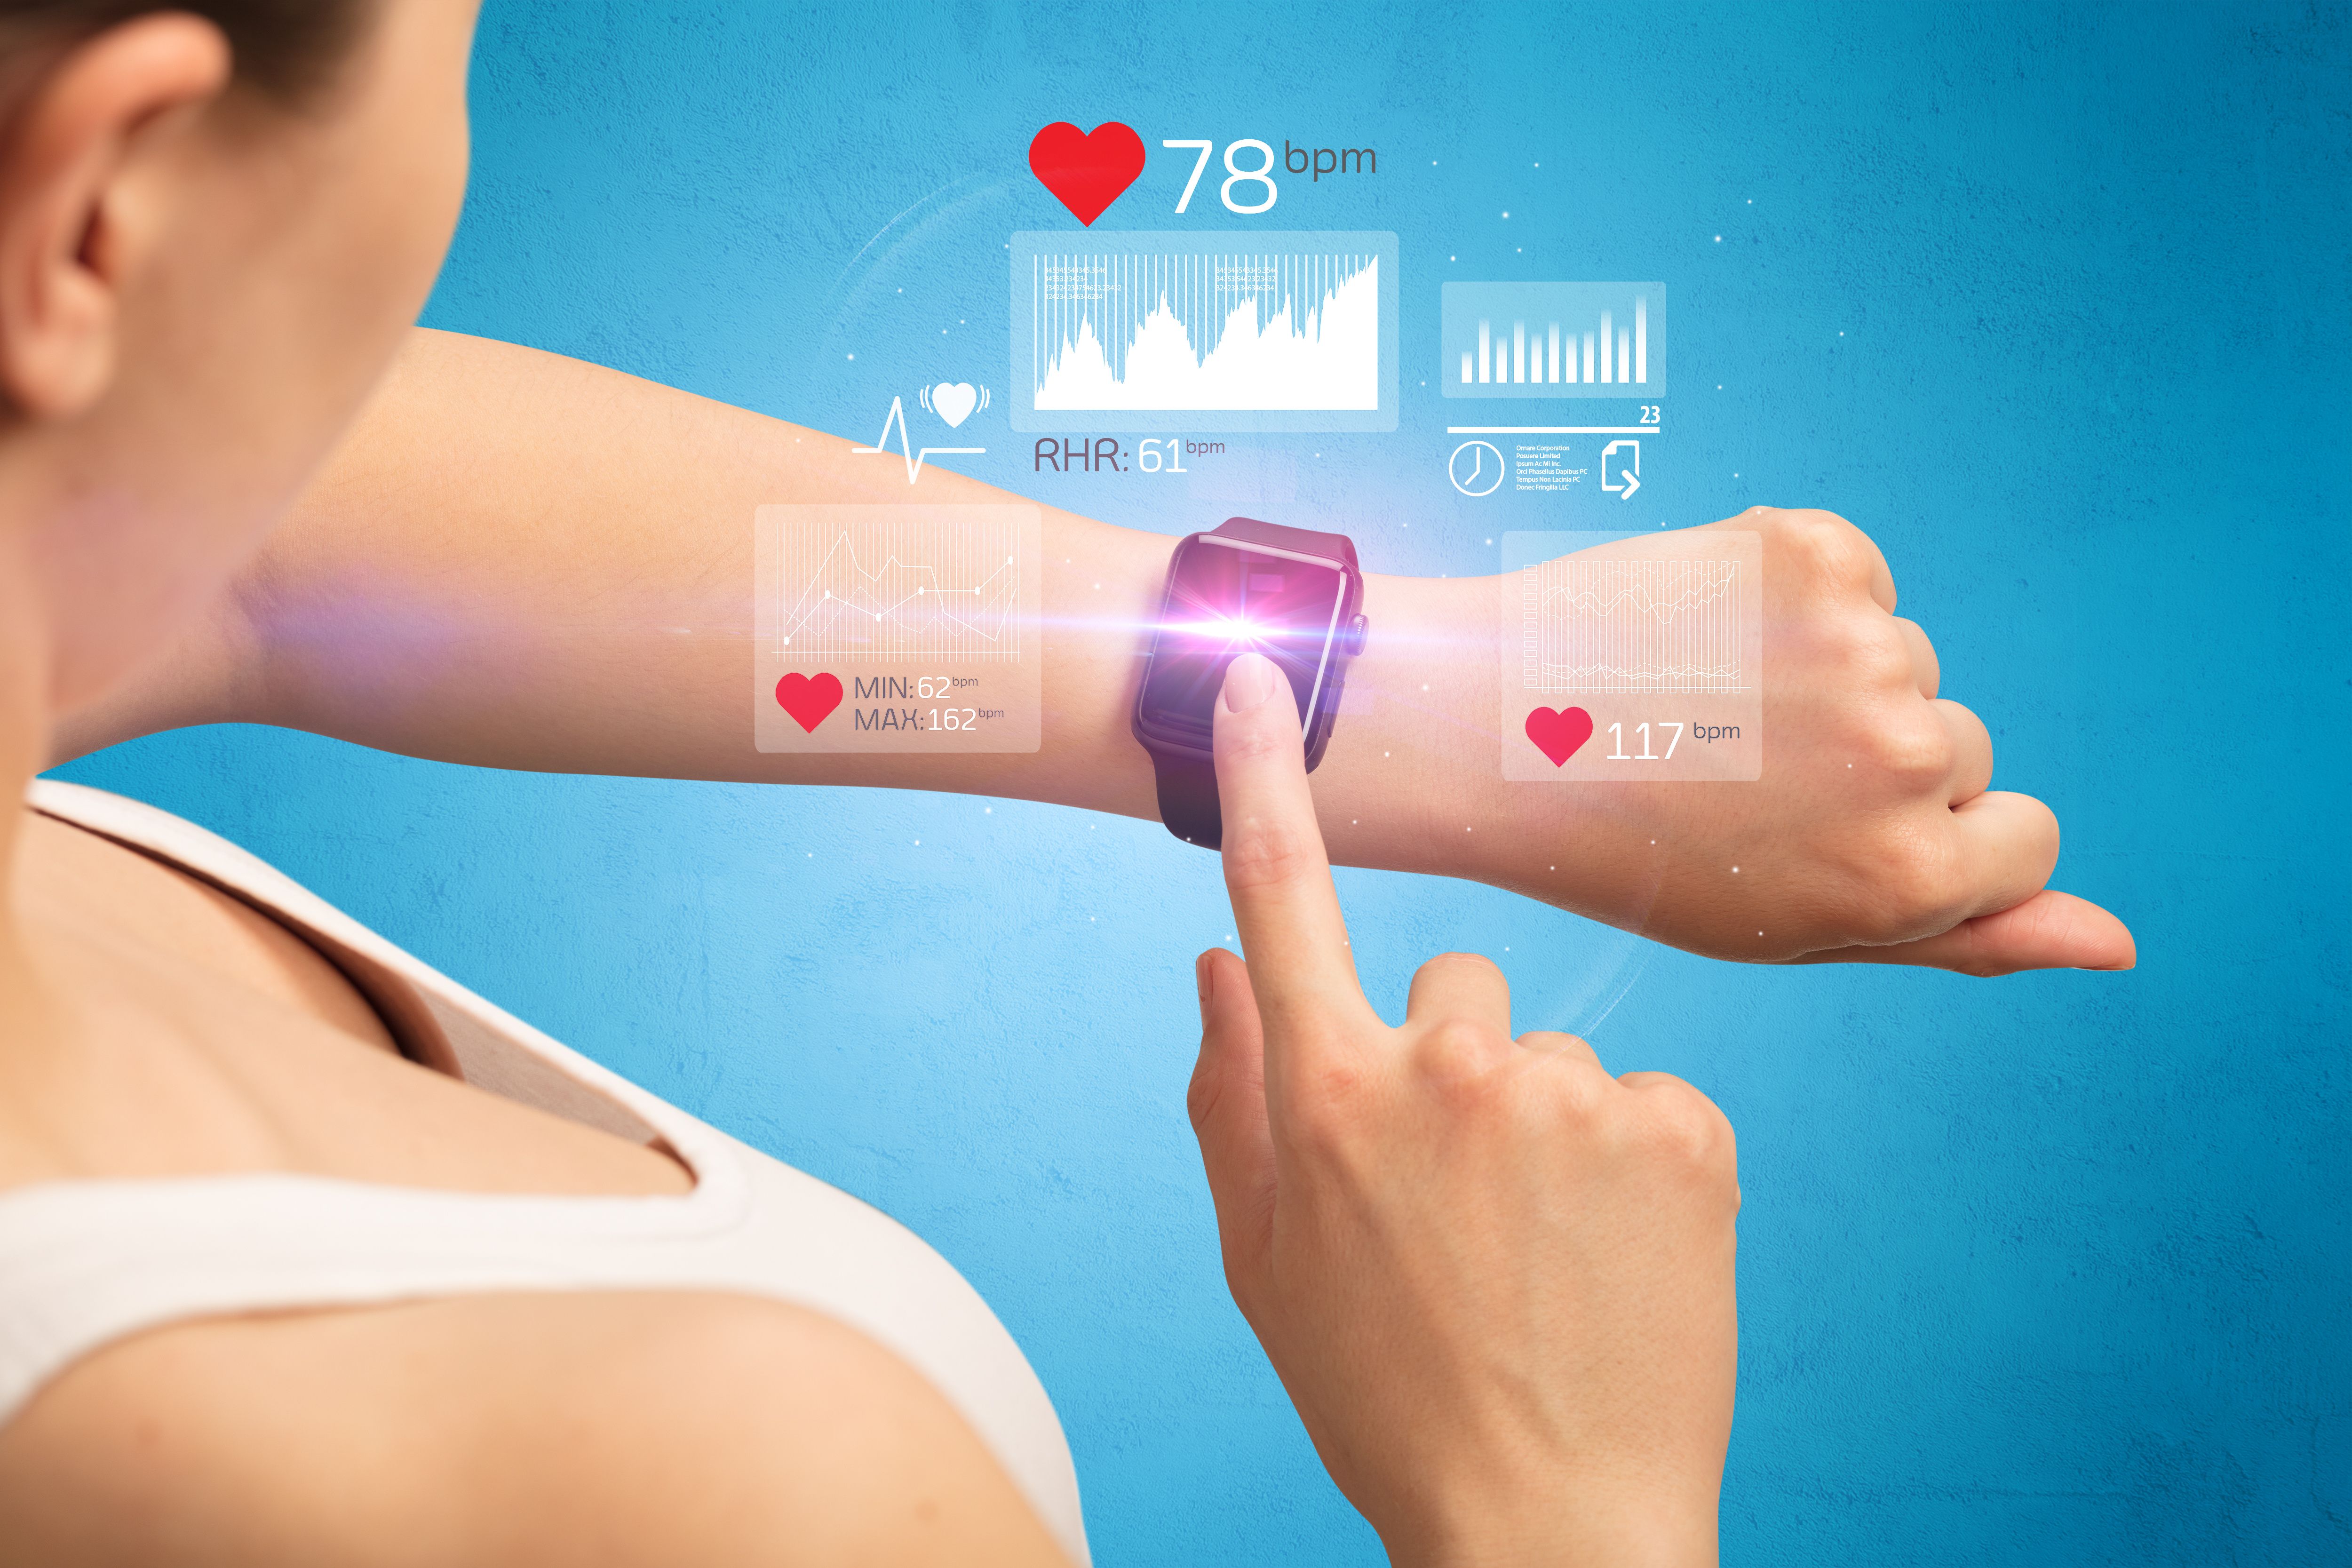 Wearable health sensors predicted COVID-19 infection with up to 73% accuracy 2-10 days before symptom onset.